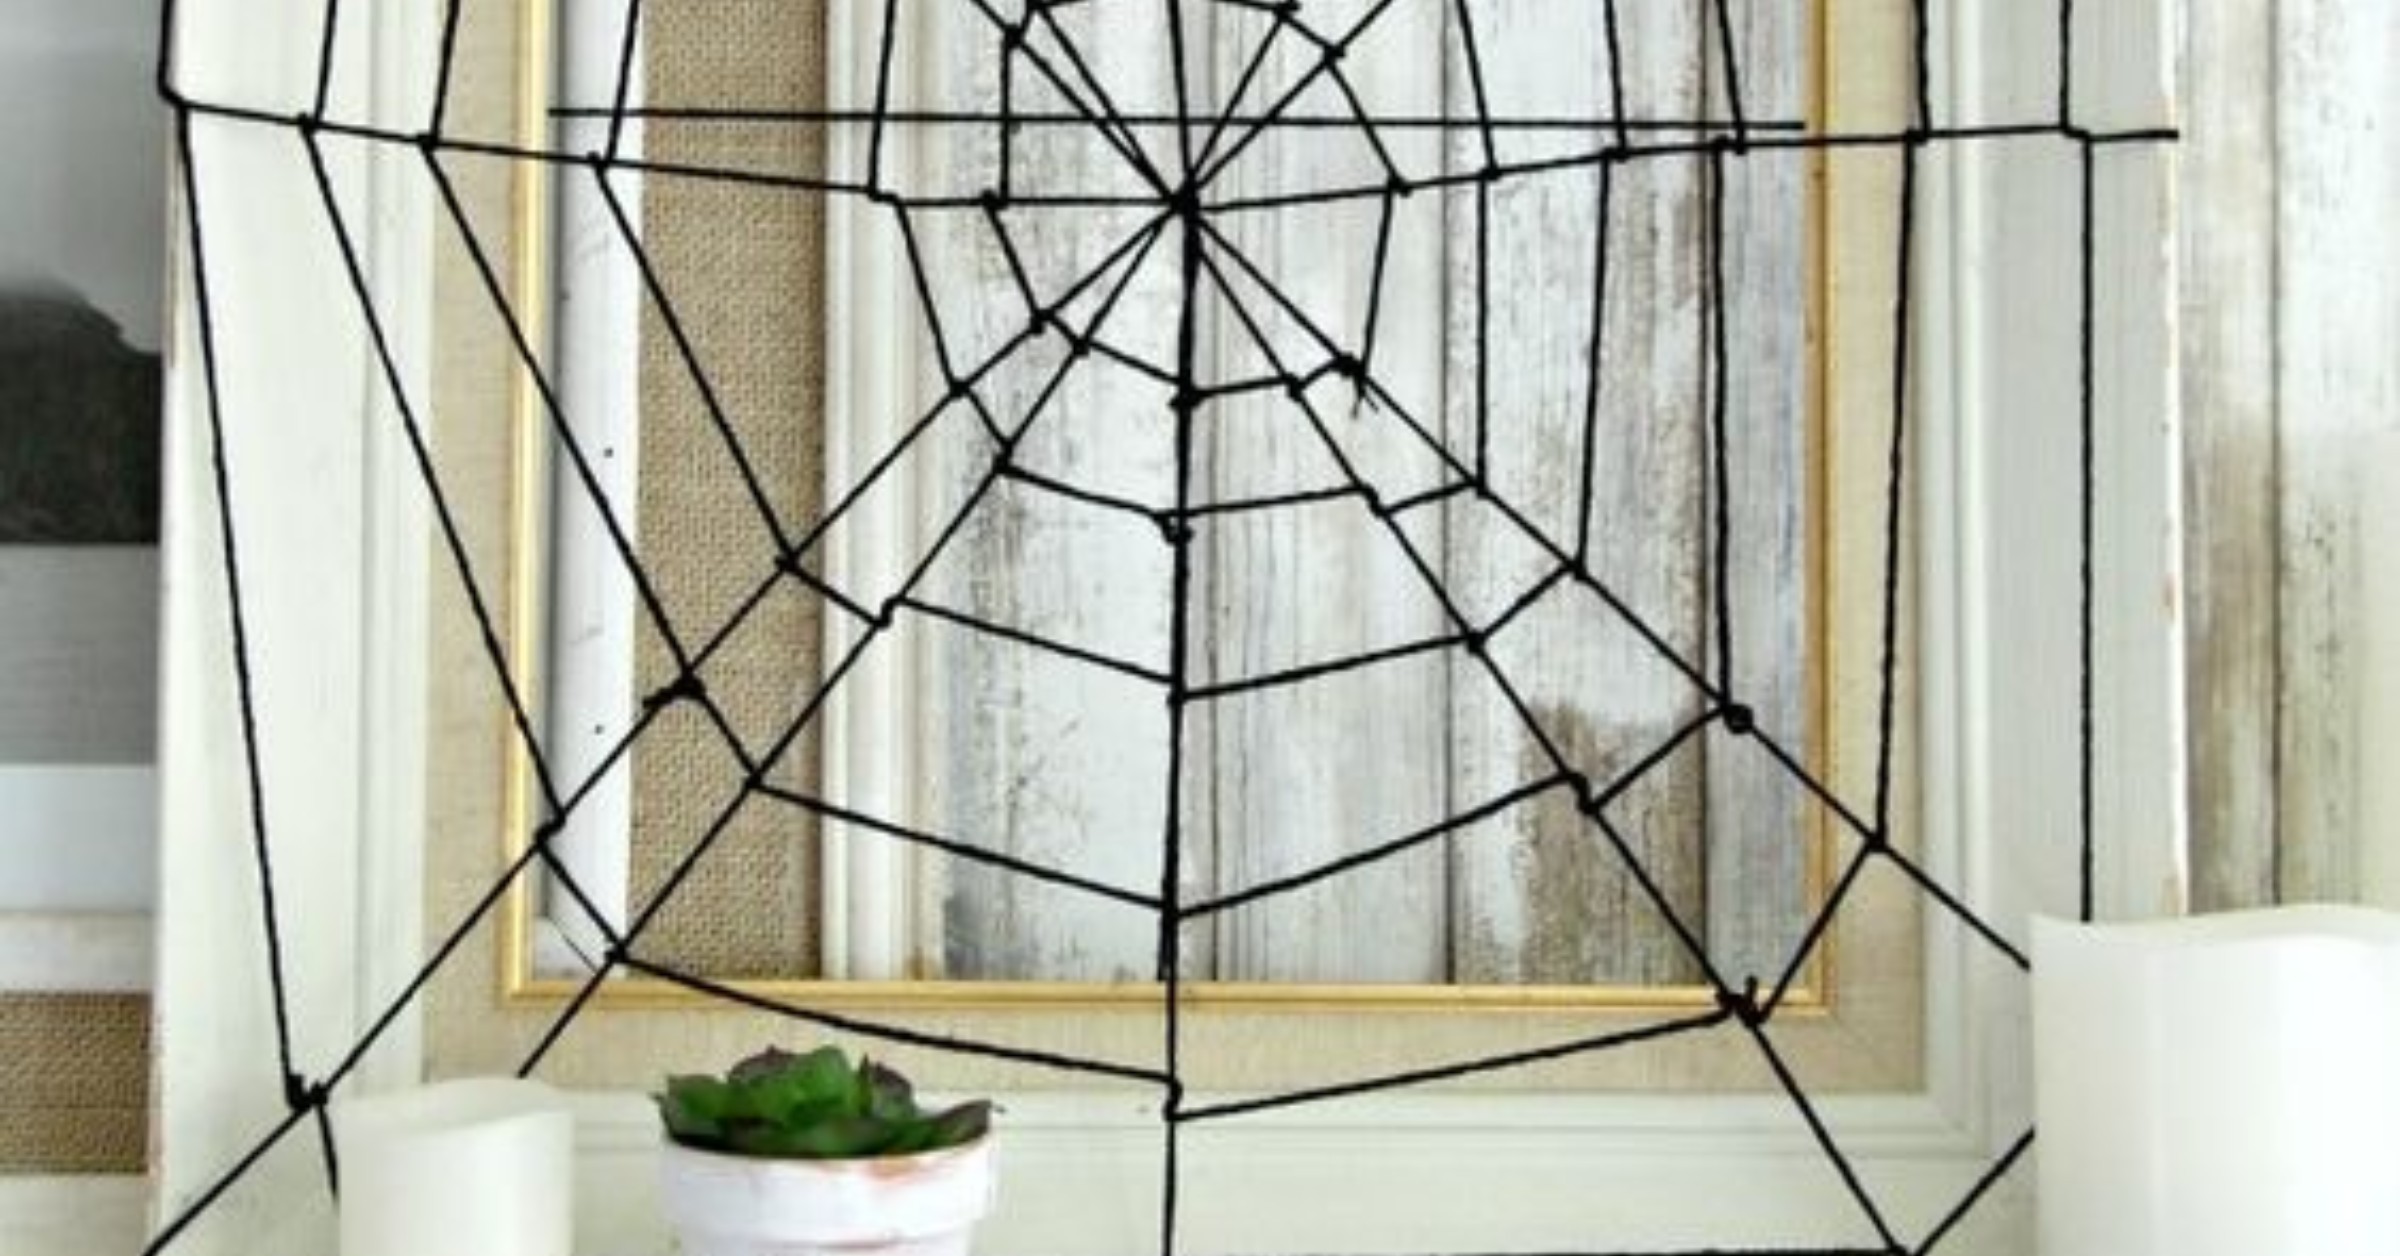 A sustainable Halloween - diy spider web image 